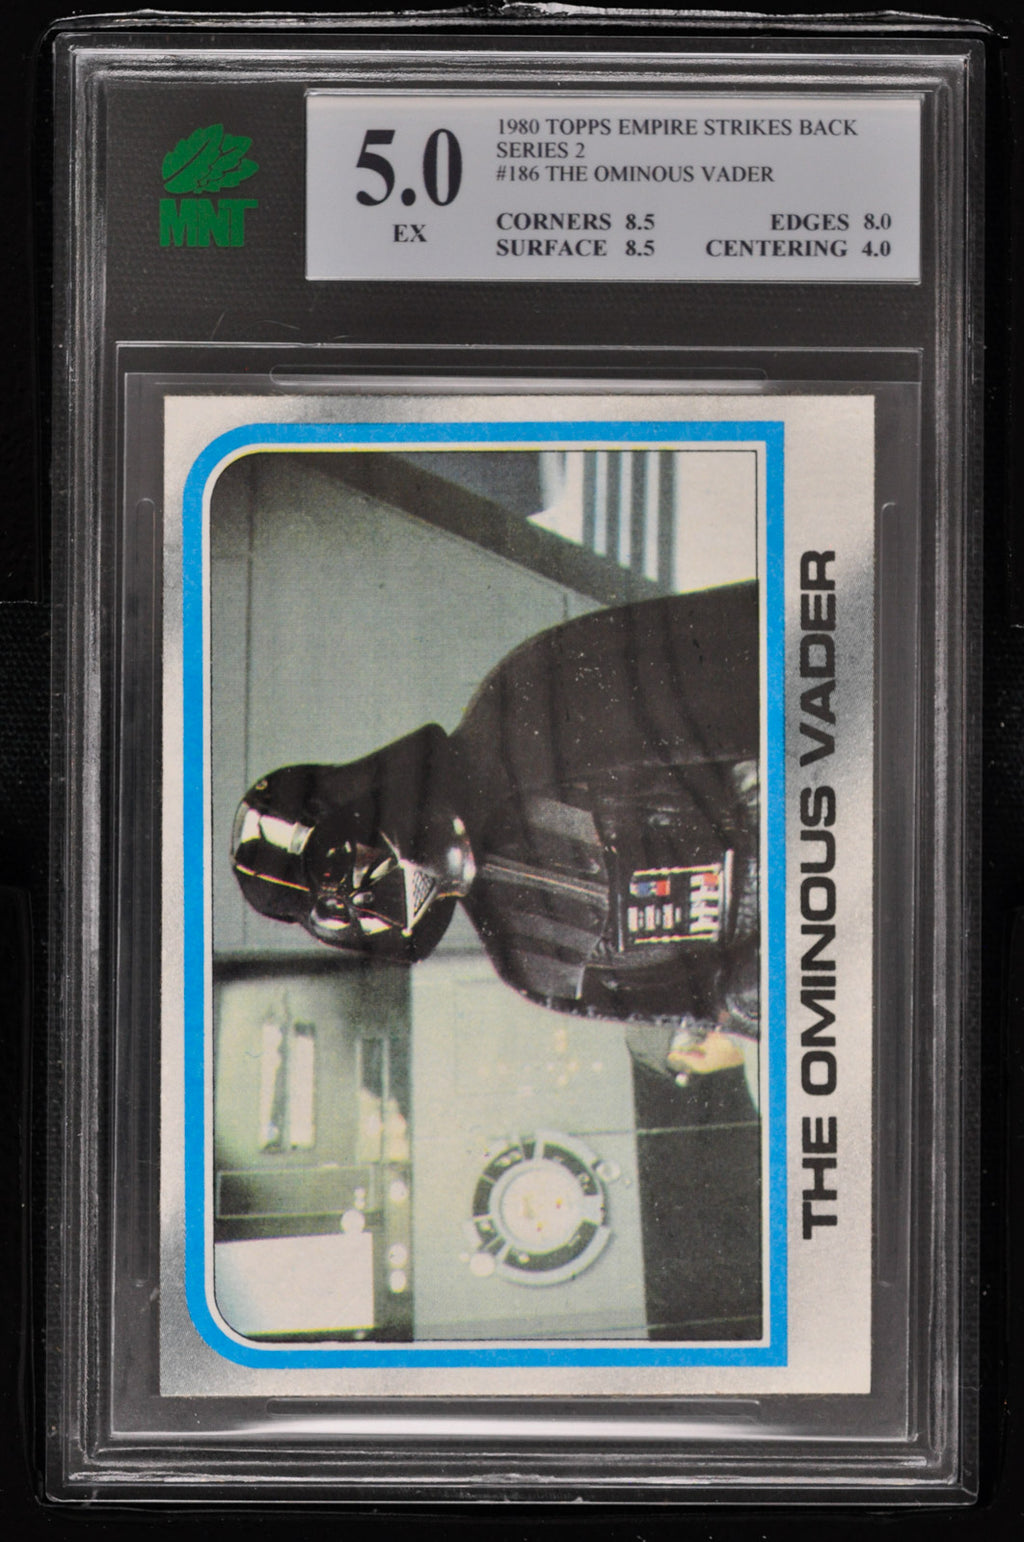 1980 Topps Star Wars ESB Series 2 #186 The Ominous Vader - MNT 5